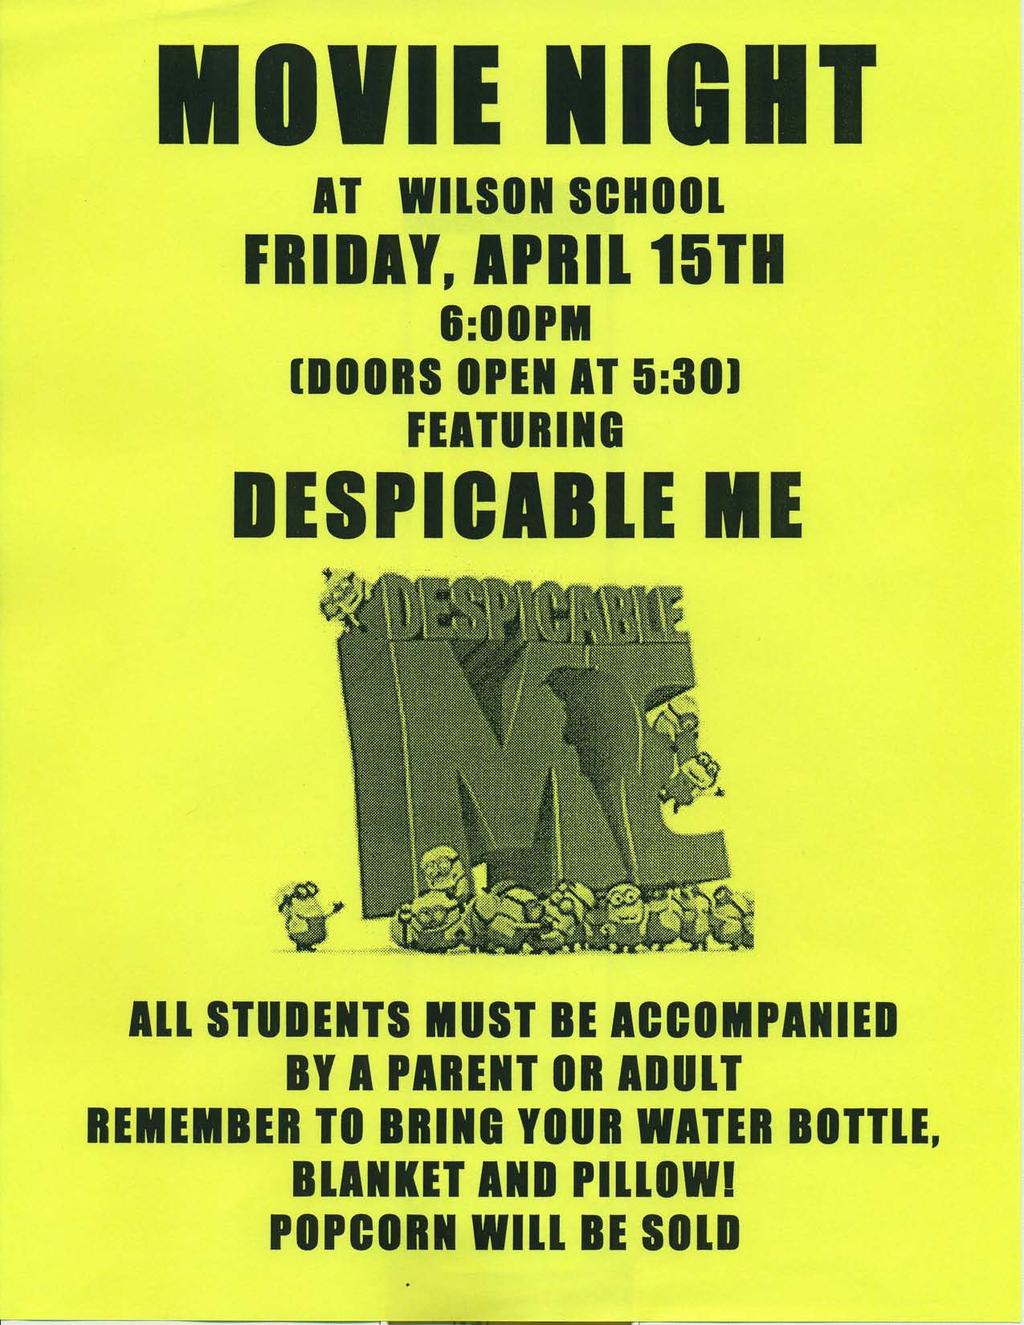 .OlIEIIIIT AT WILSON SCHOOL FRillY, IPRIl15TH, 6:00PM IIOORS OPEN AT 5:301 FEATURING DESPICABLE ME ALL STUIENTS